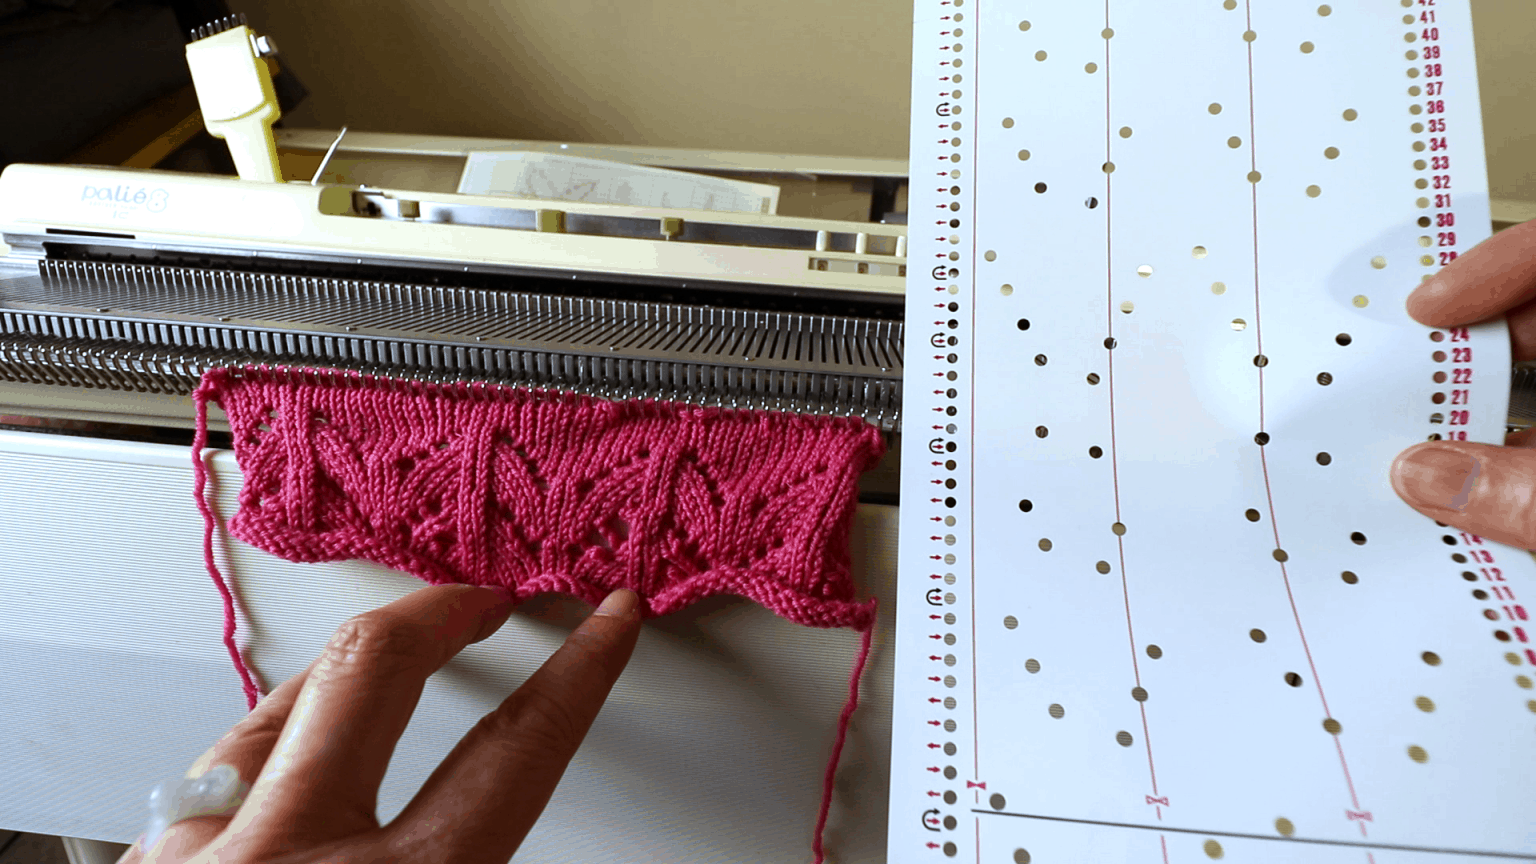 How To Knit A Lace Pattern With A Punchcard On A Brother Standard Gauge Knitting Machine